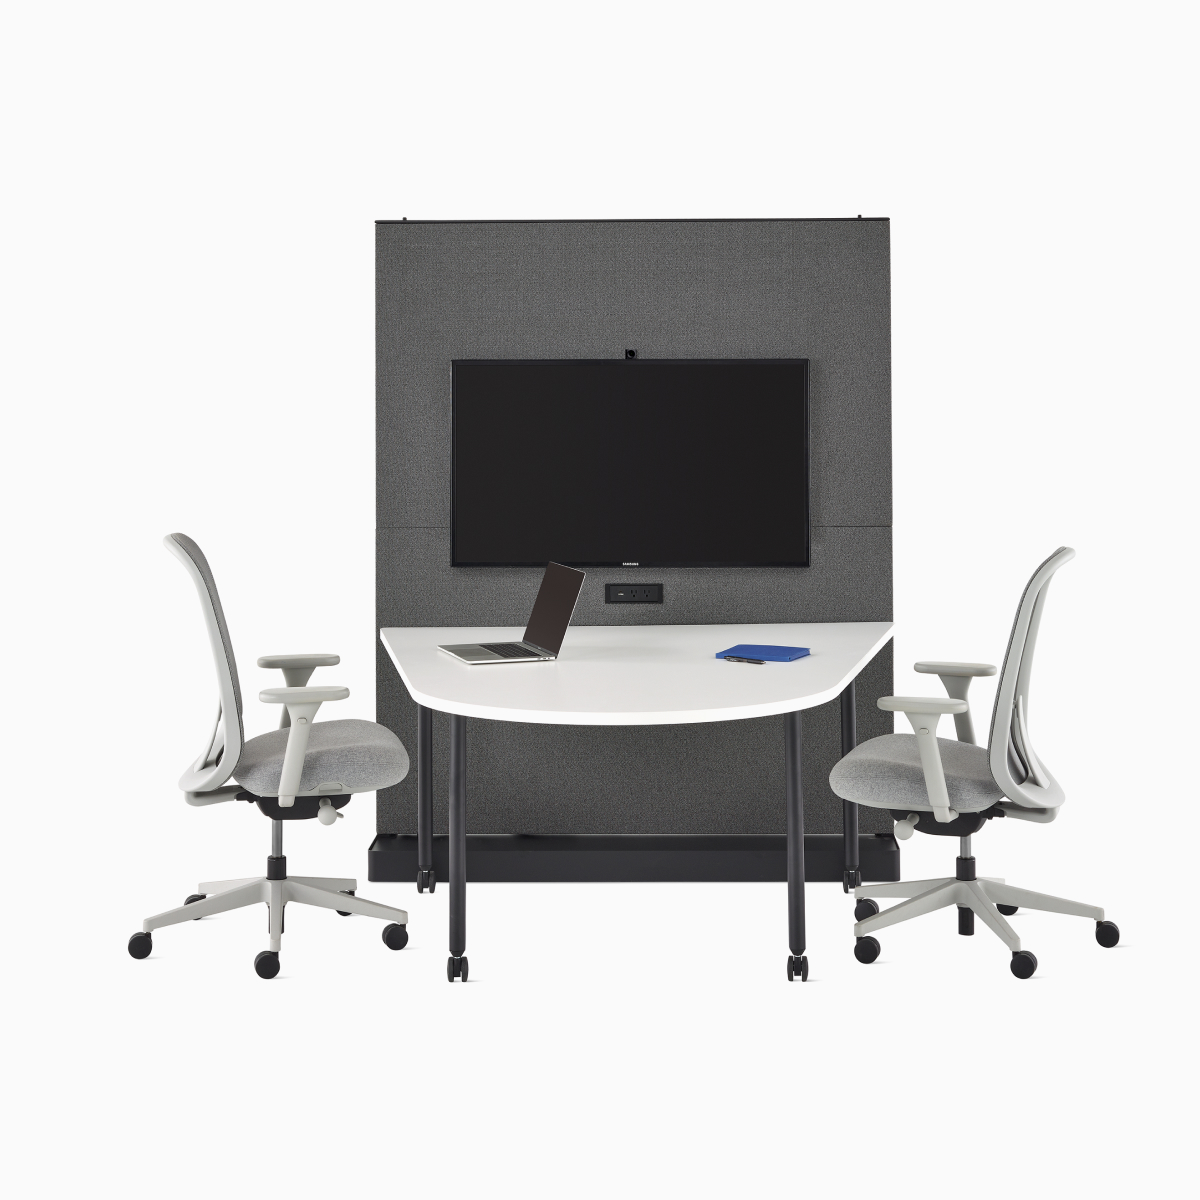 An OE1 Agile Wall with fabric tile with a TV for video conferencing, viewed from the front.